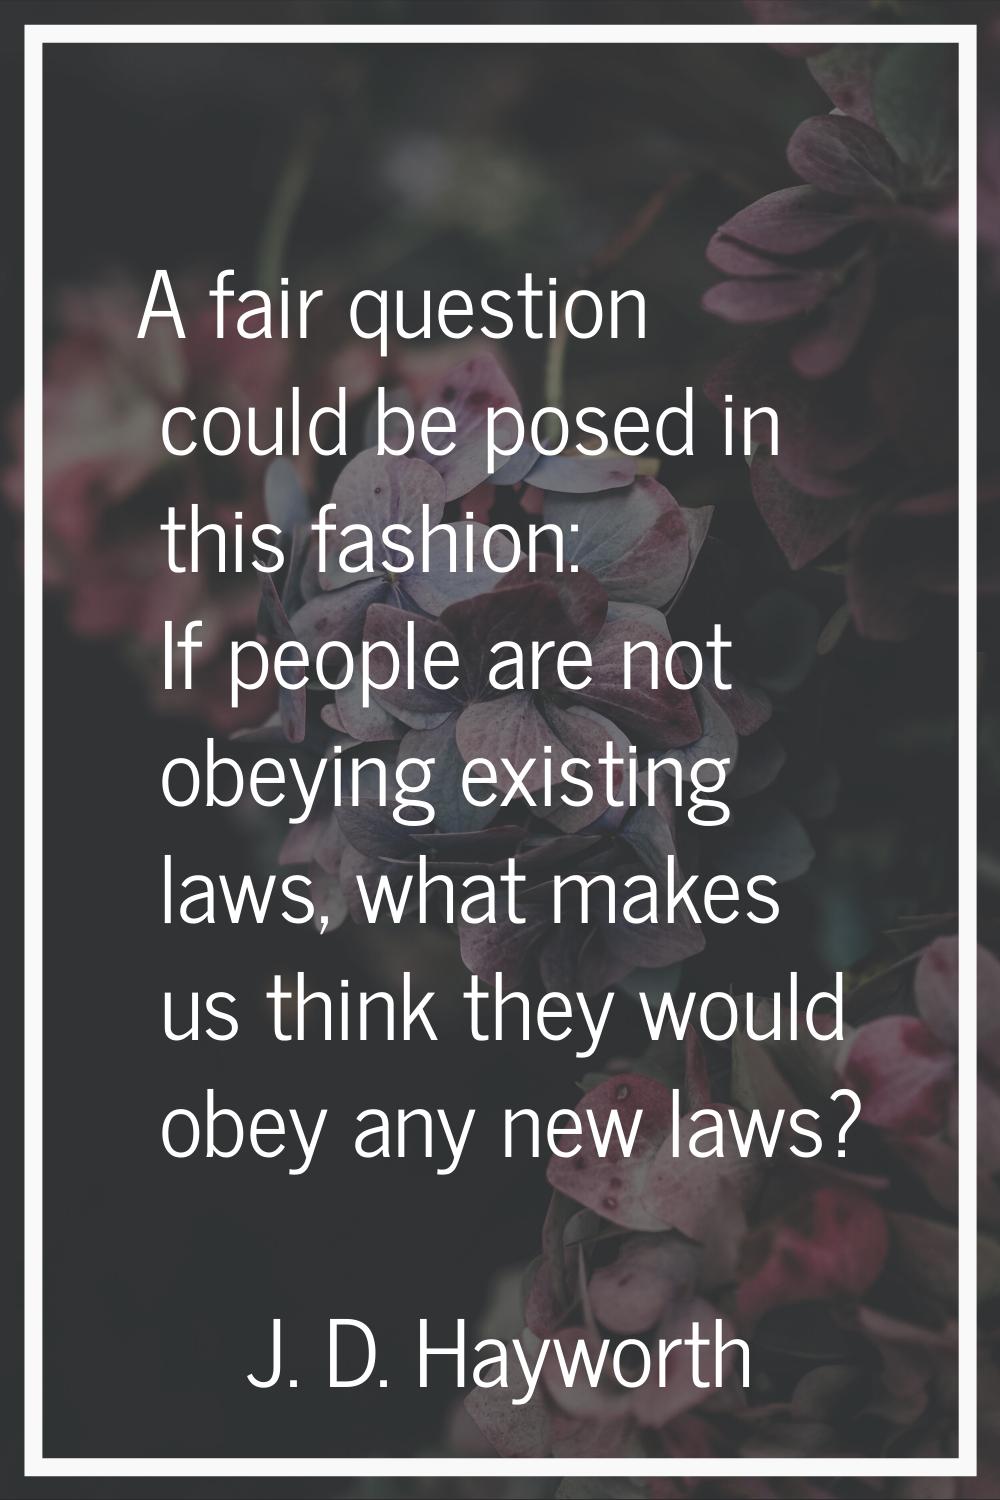 A fair question could be posed in this fashion: If people are not obeying existing laws, what makes